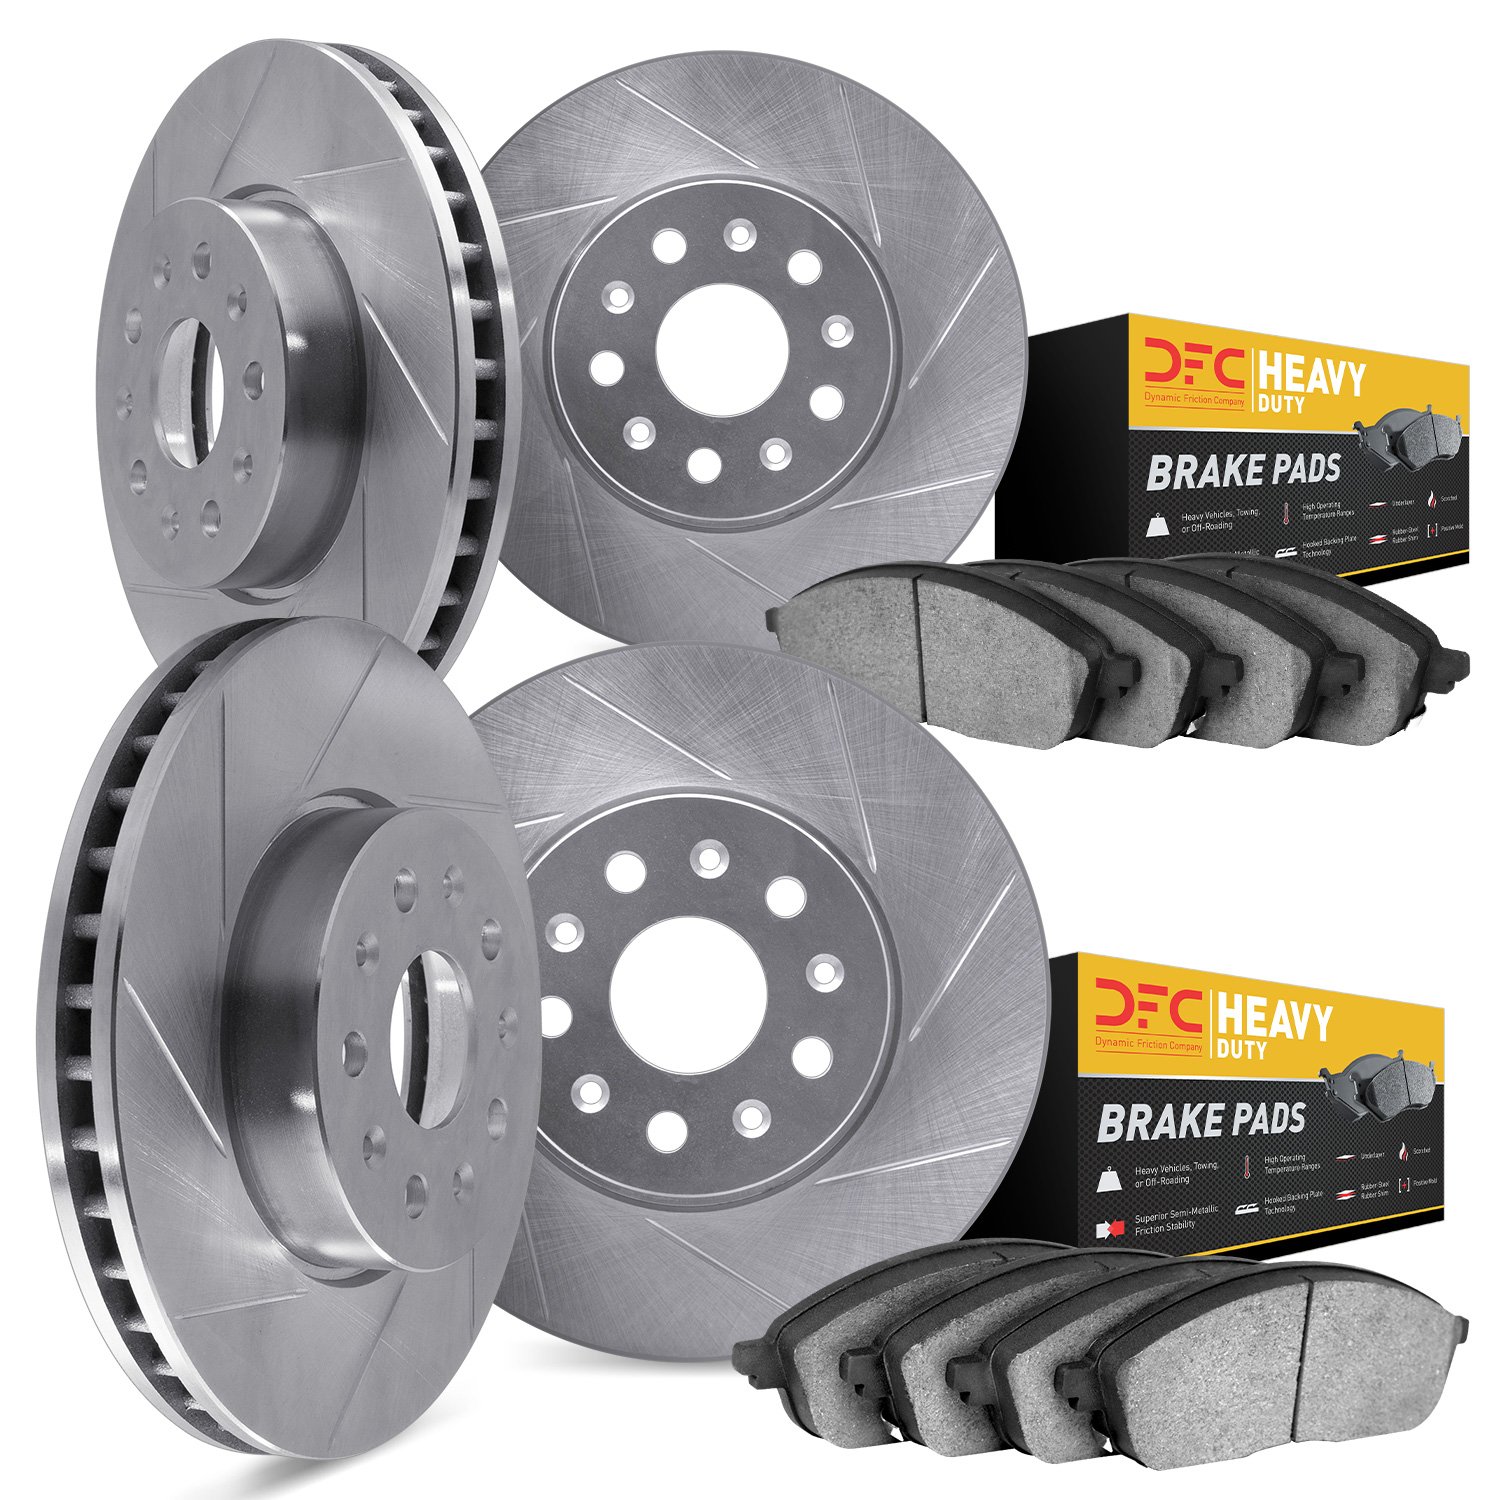 5204-56041 Slotted Brake Rotors w/Heavy-Duty Brake Pads Kits [Silver], 2003-2011 Ford/Lincoln/Mercury/Mazda, Position: Front and